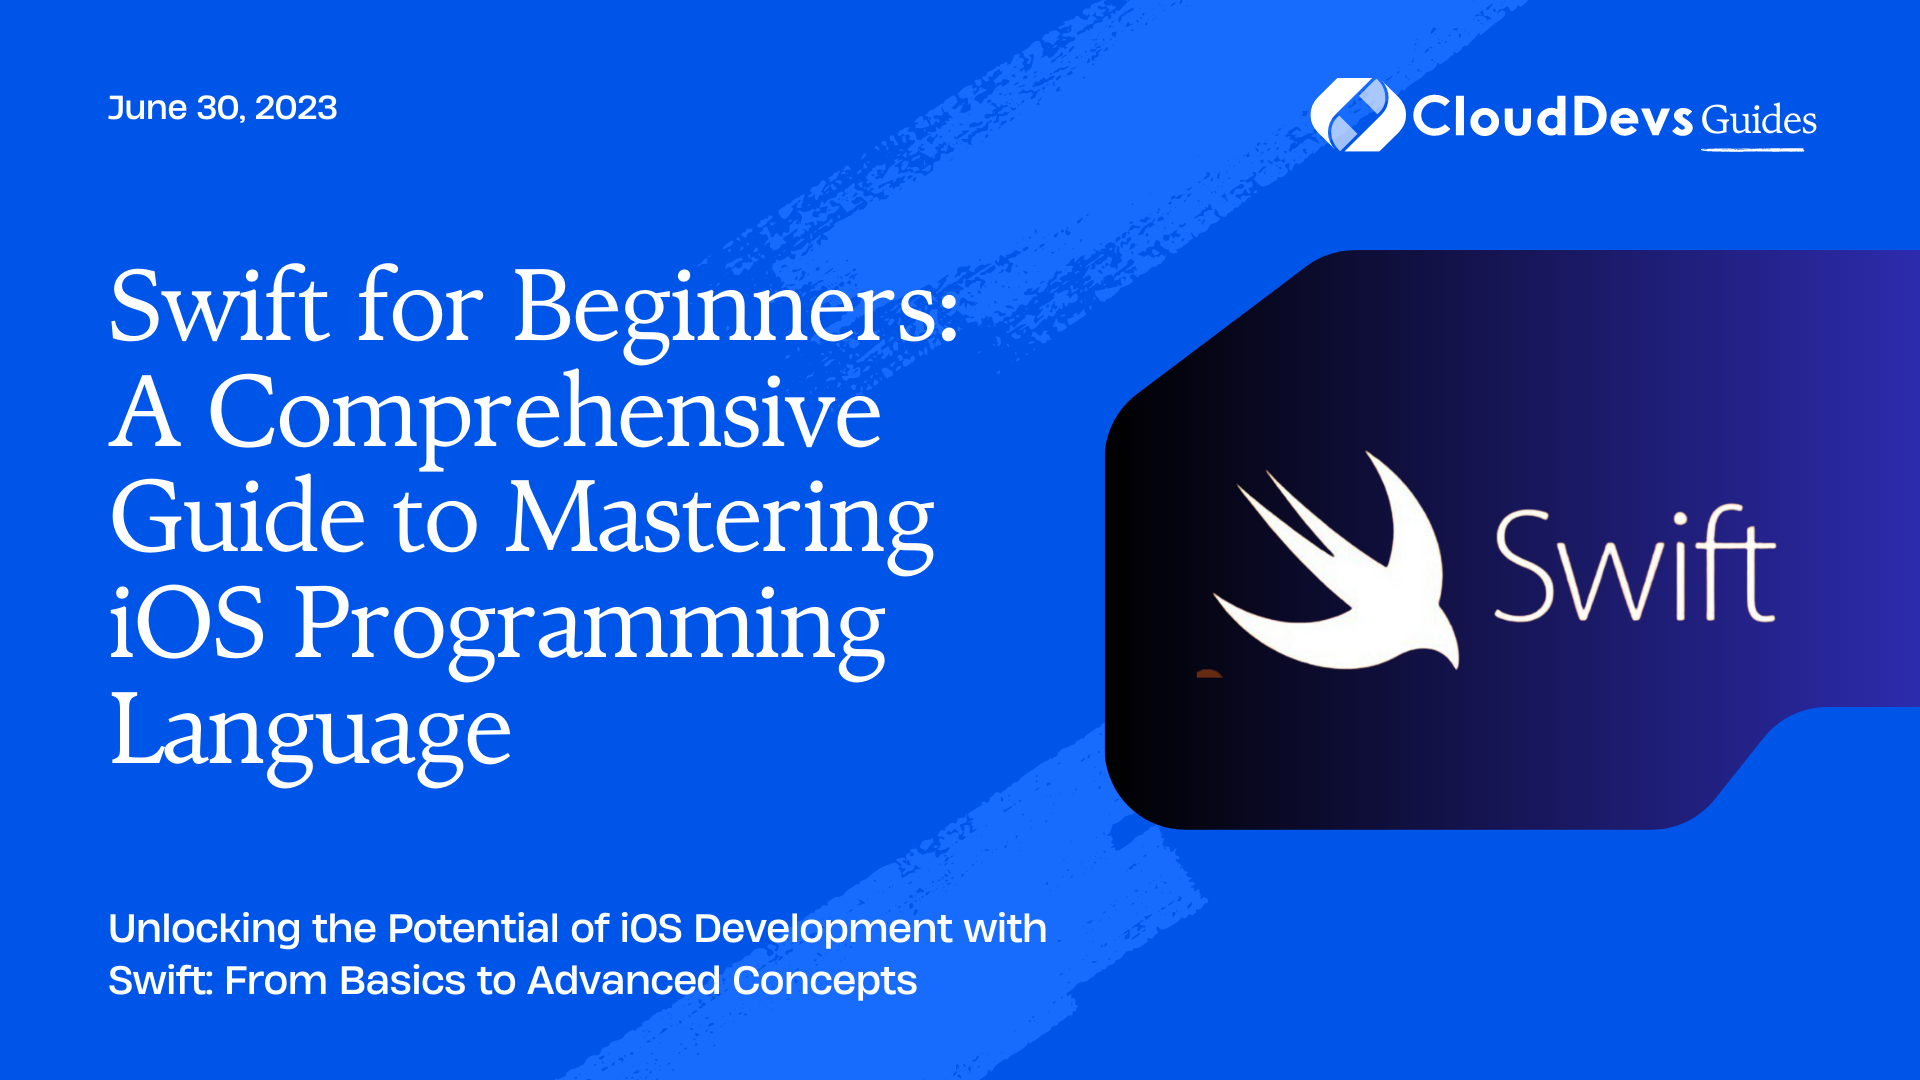 Swift for Beginners: A Comprehensive Guide to Mastering iOS Programming Language